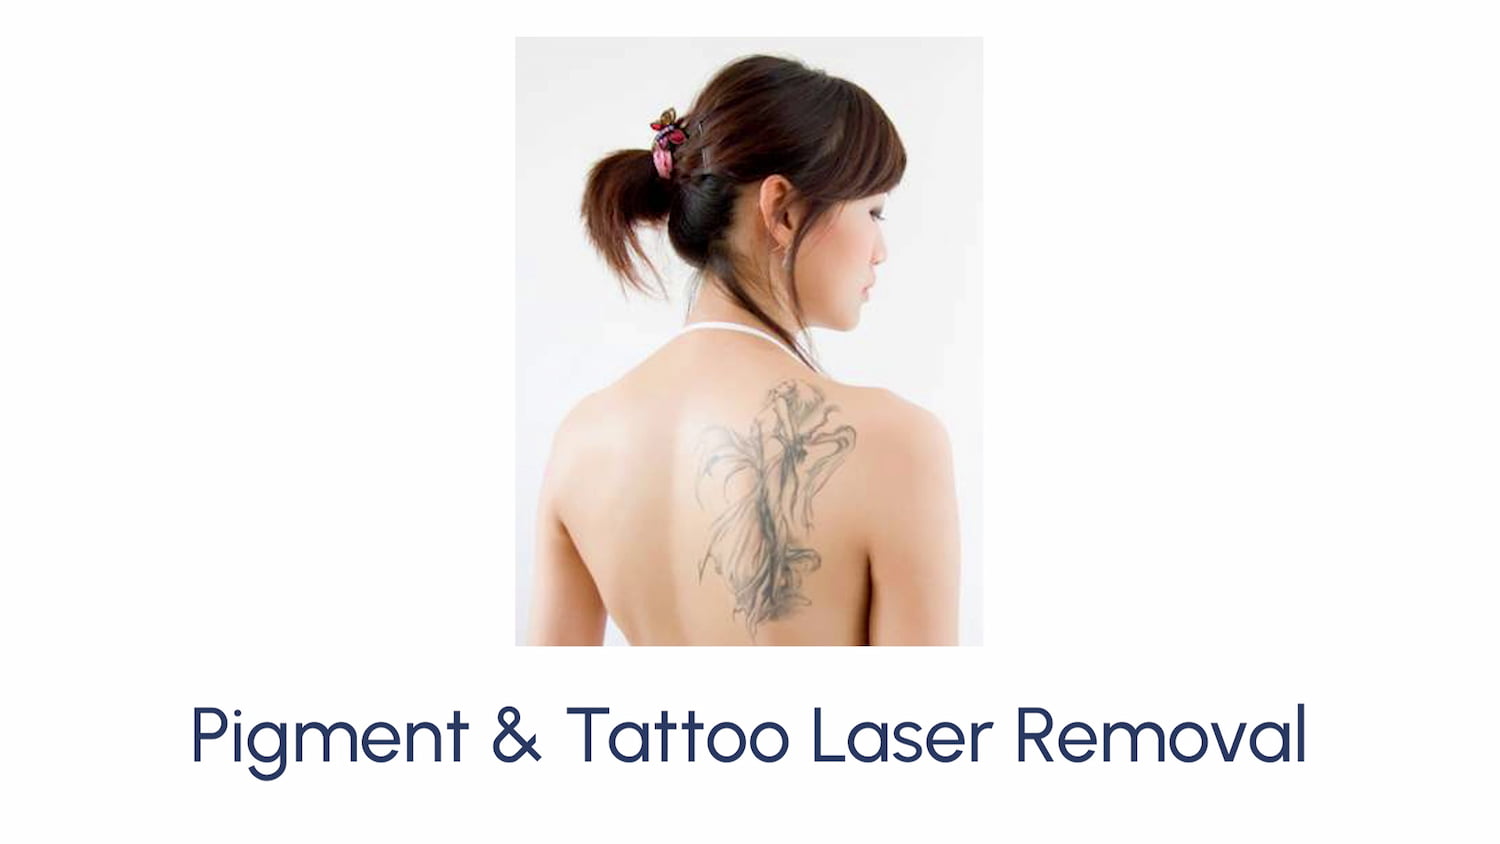 HOW MANY LASER TATTOO REMOVAL SESSIONS WILL NEED?